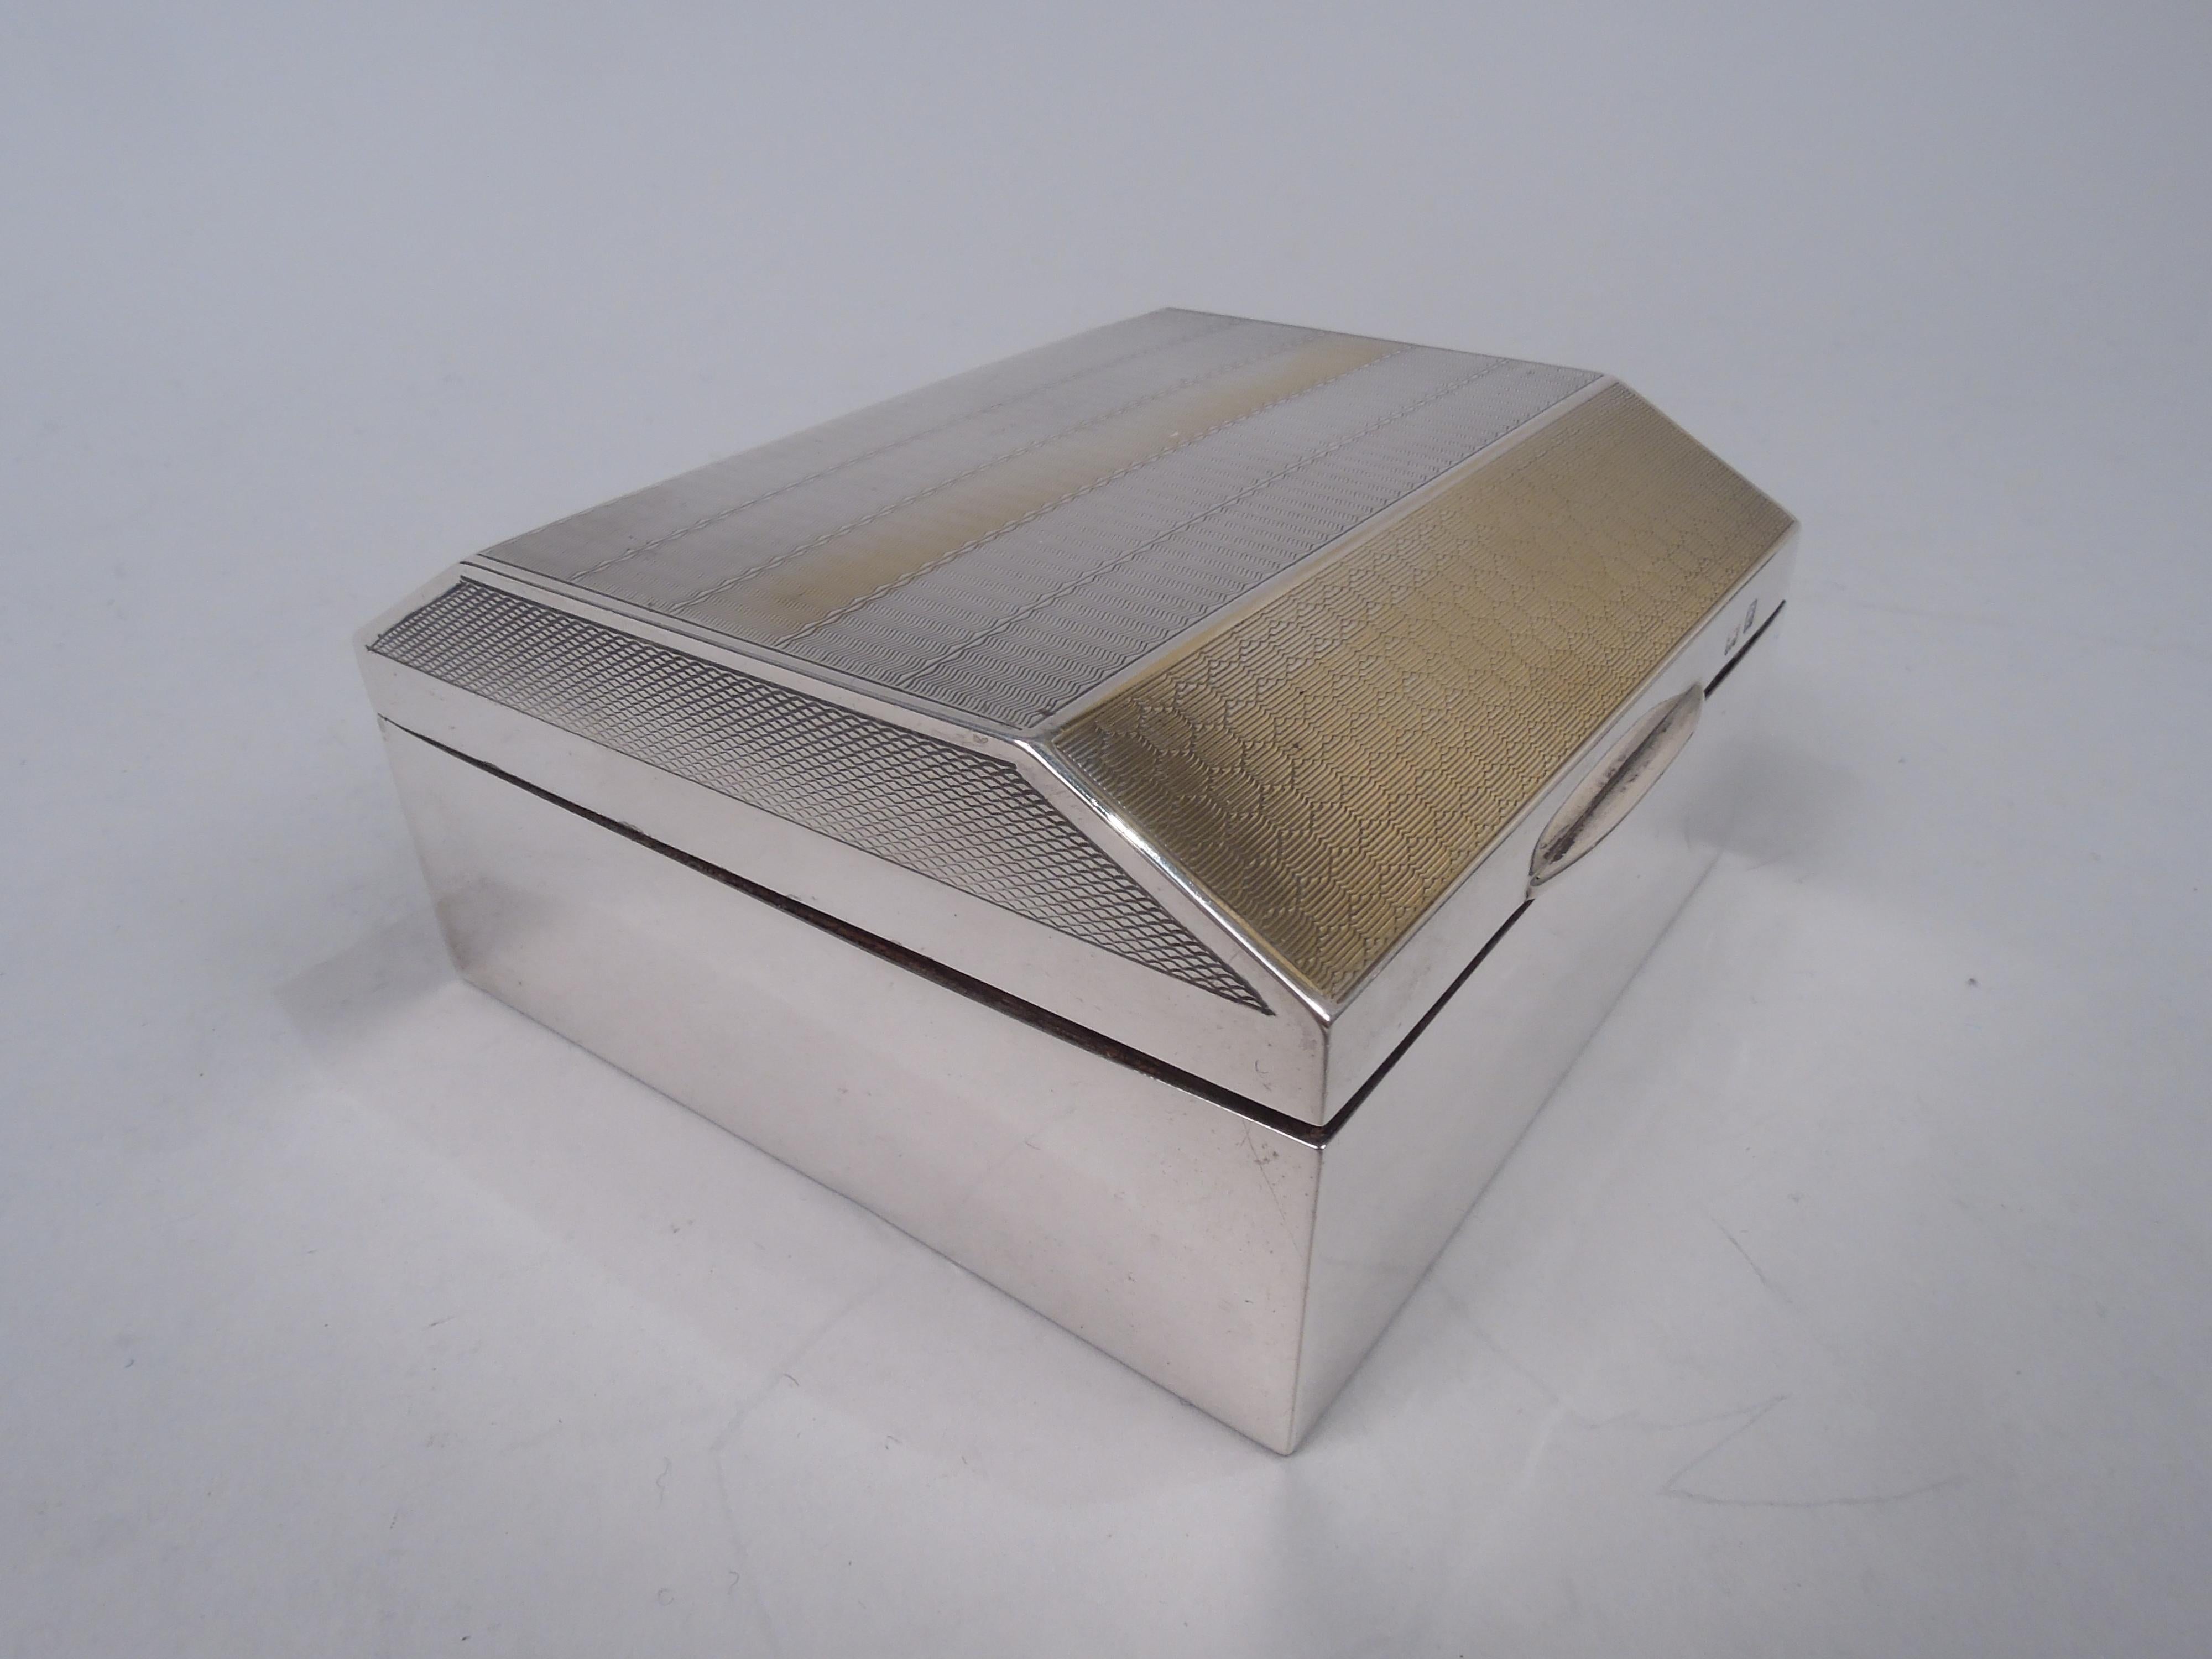 Art Deco sterling silver box. Made by Henry Matthews in Birmingham in 1927. Square with straight and plain sides. Cover hinged, tabbed, and chamfered. On top parcel gilt with engine-turned ornament with wavy lines between honeycomb; sizes have